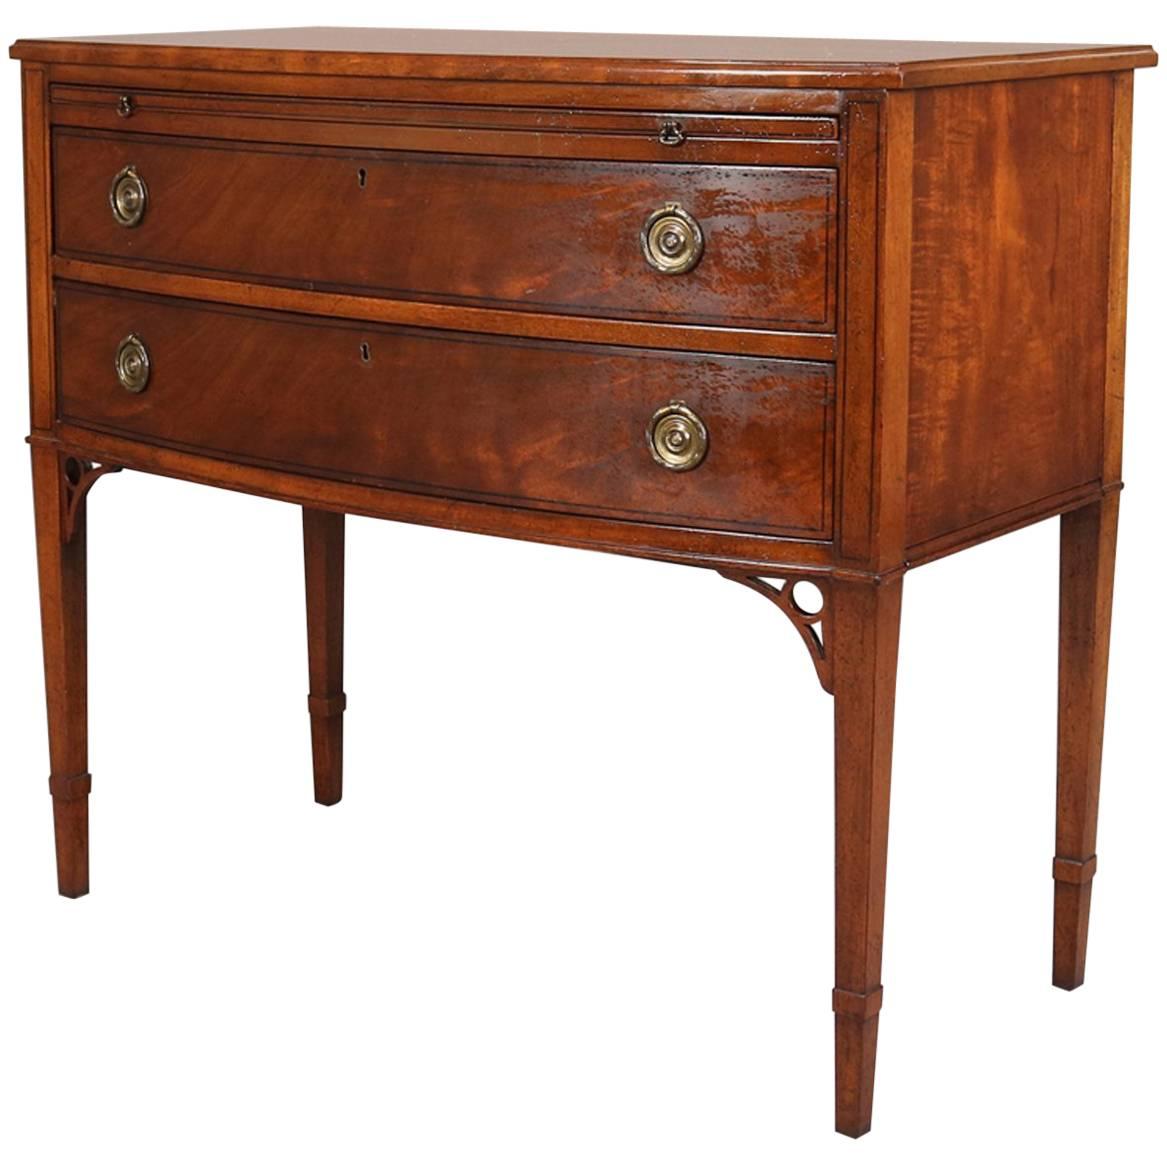 Hepplewhite Style Flame Mahogany Two-Drawer Silver Chest by Beacon Hill